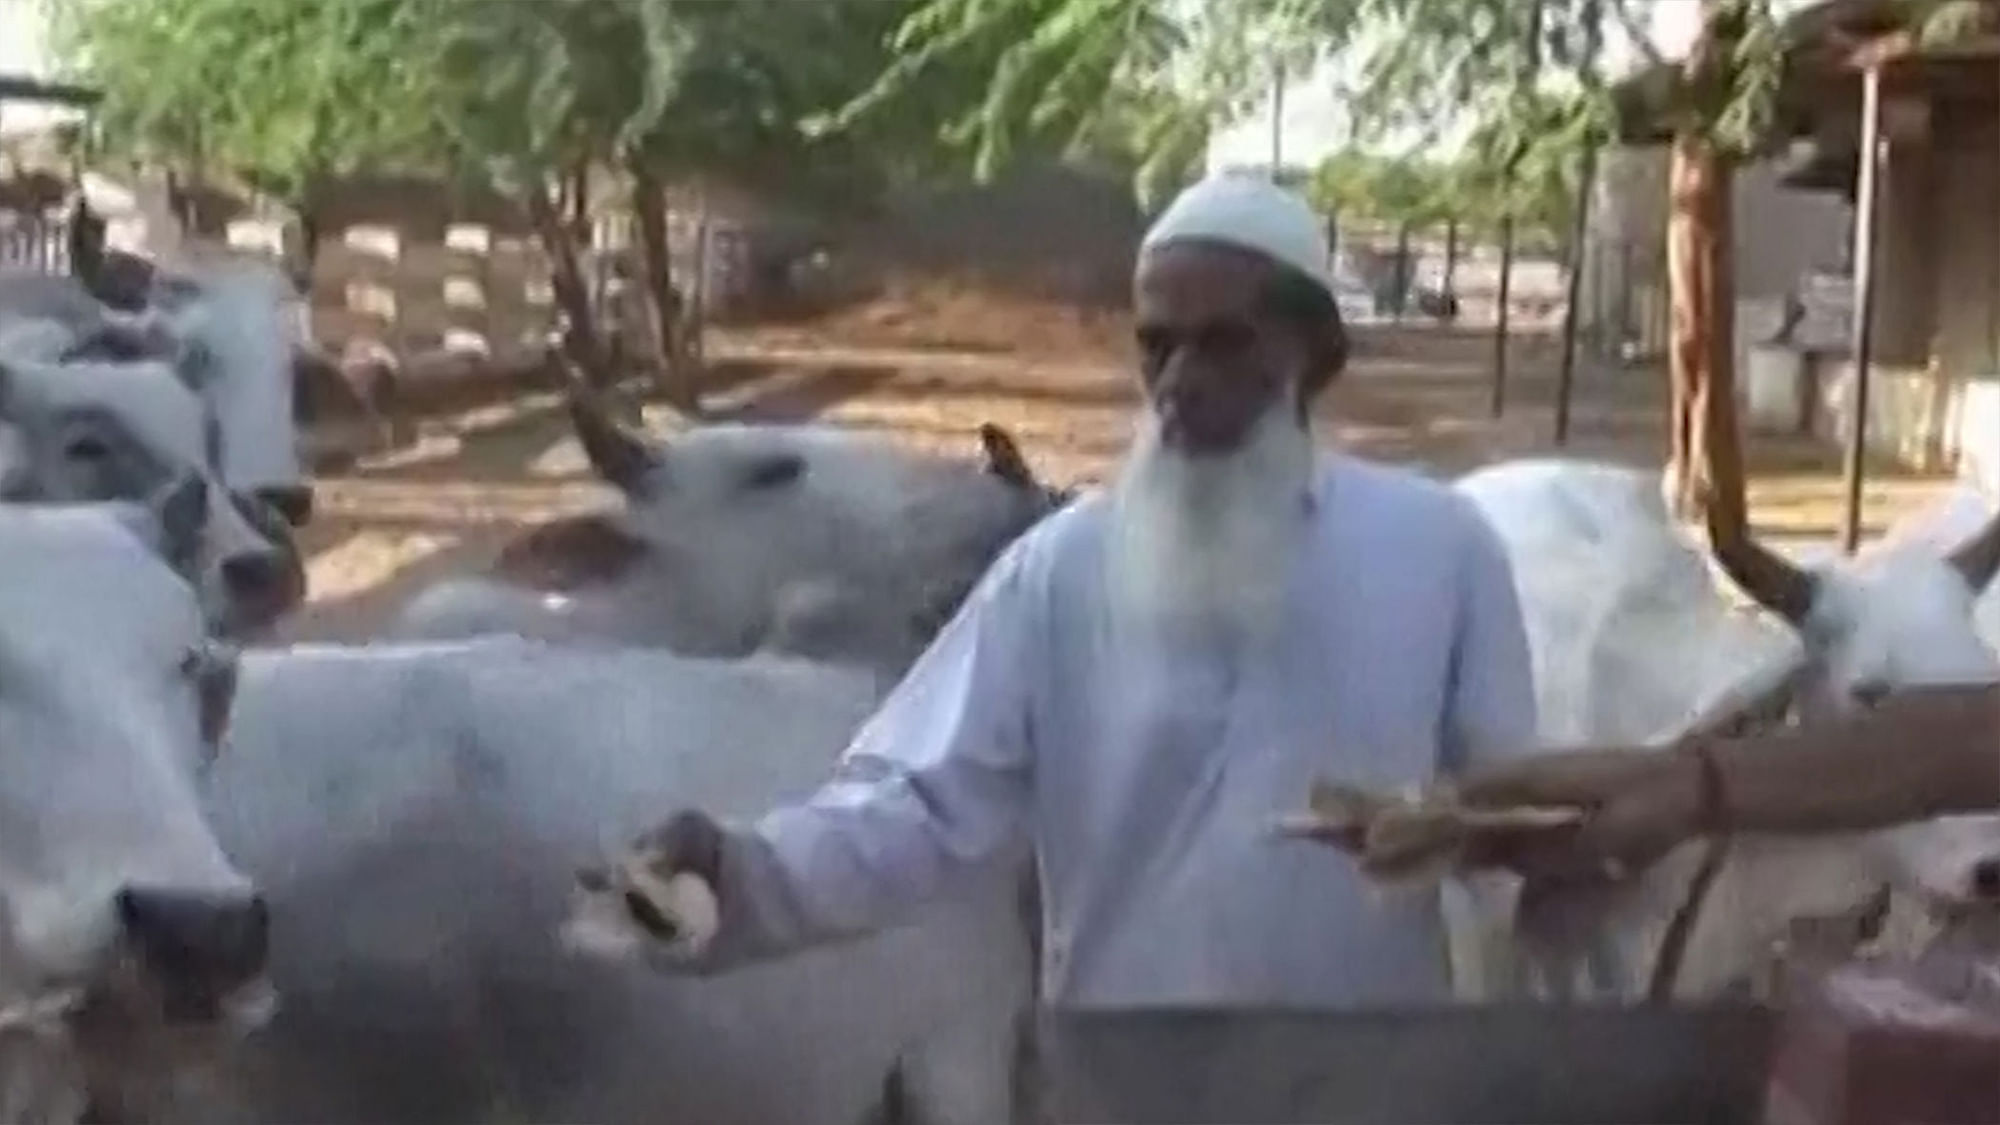 Haji Mehruddin, has been arranging food for cows for the last 15 years. (Photo: ANI screengrab)